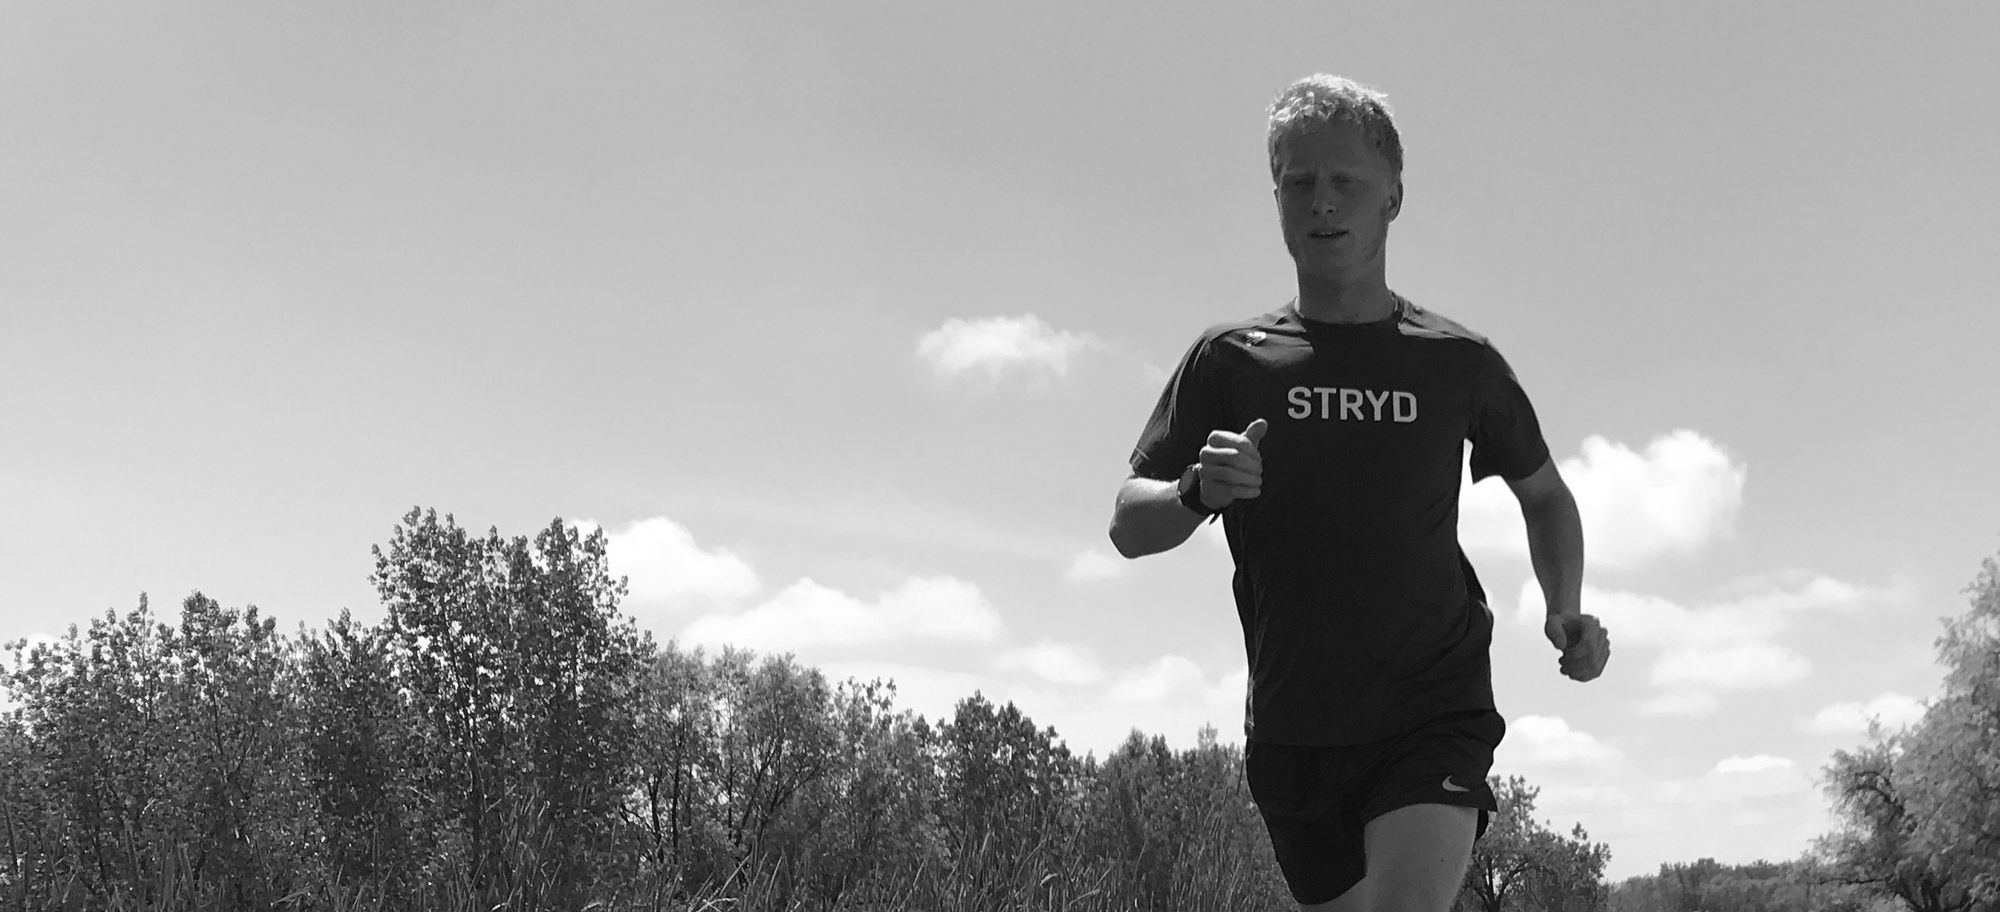 Race Recovery: Using Stryd To Understand When To Return to Training